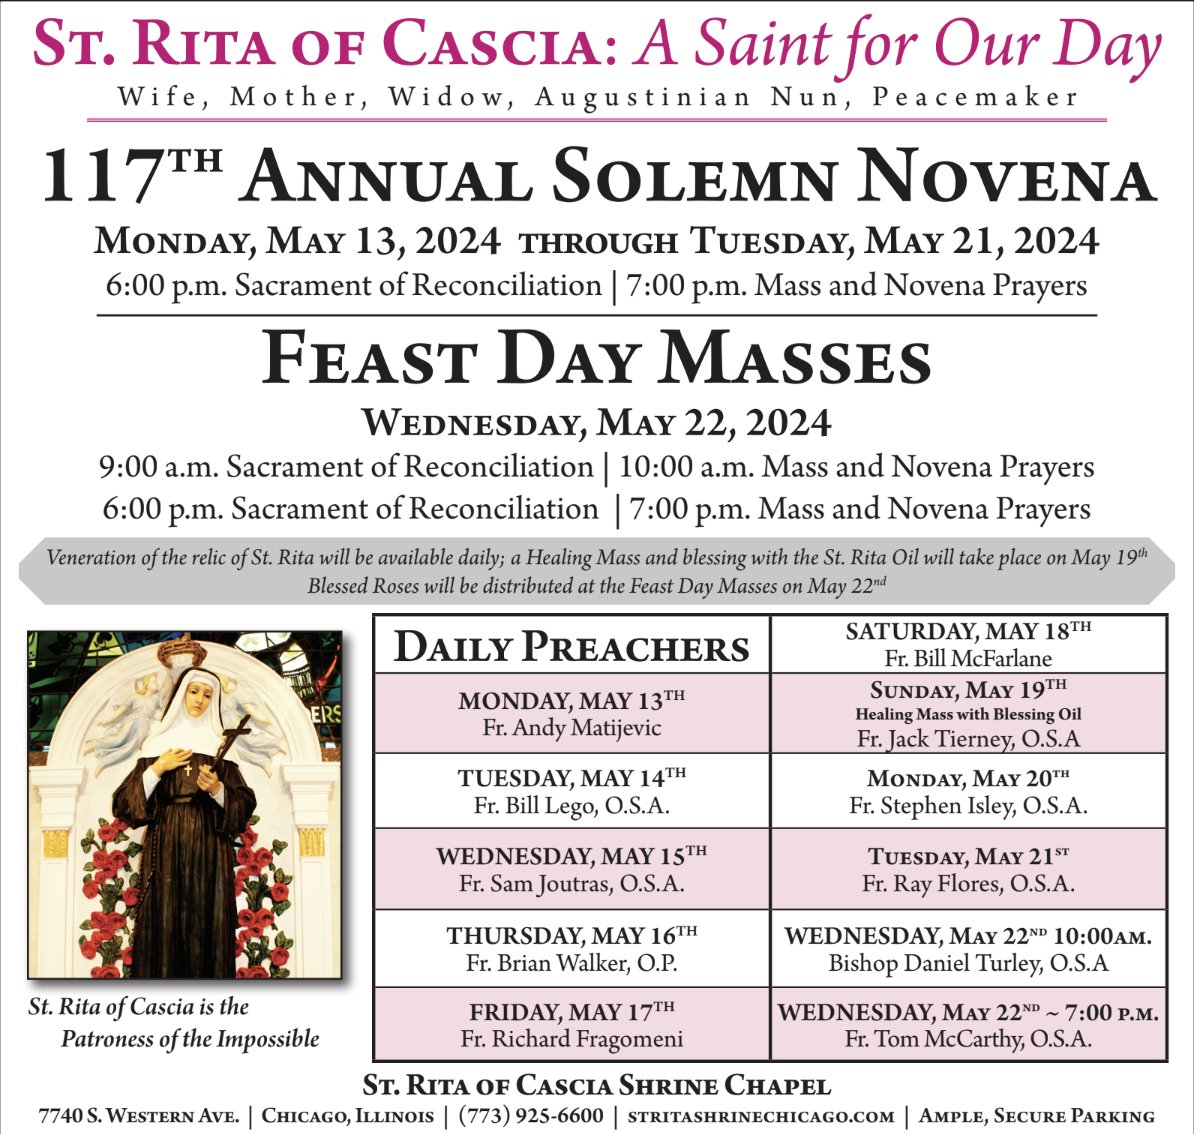 All are invited to our 117th Annual Solemn Novena beginning next Monday, May 13, through Tuesday, May 21, in our Shrine Chapel. Everyone is then welcome to join us in celebrating the Feast Day of St. Rita with our two Feast Day Masses on Wednesday, May 22.